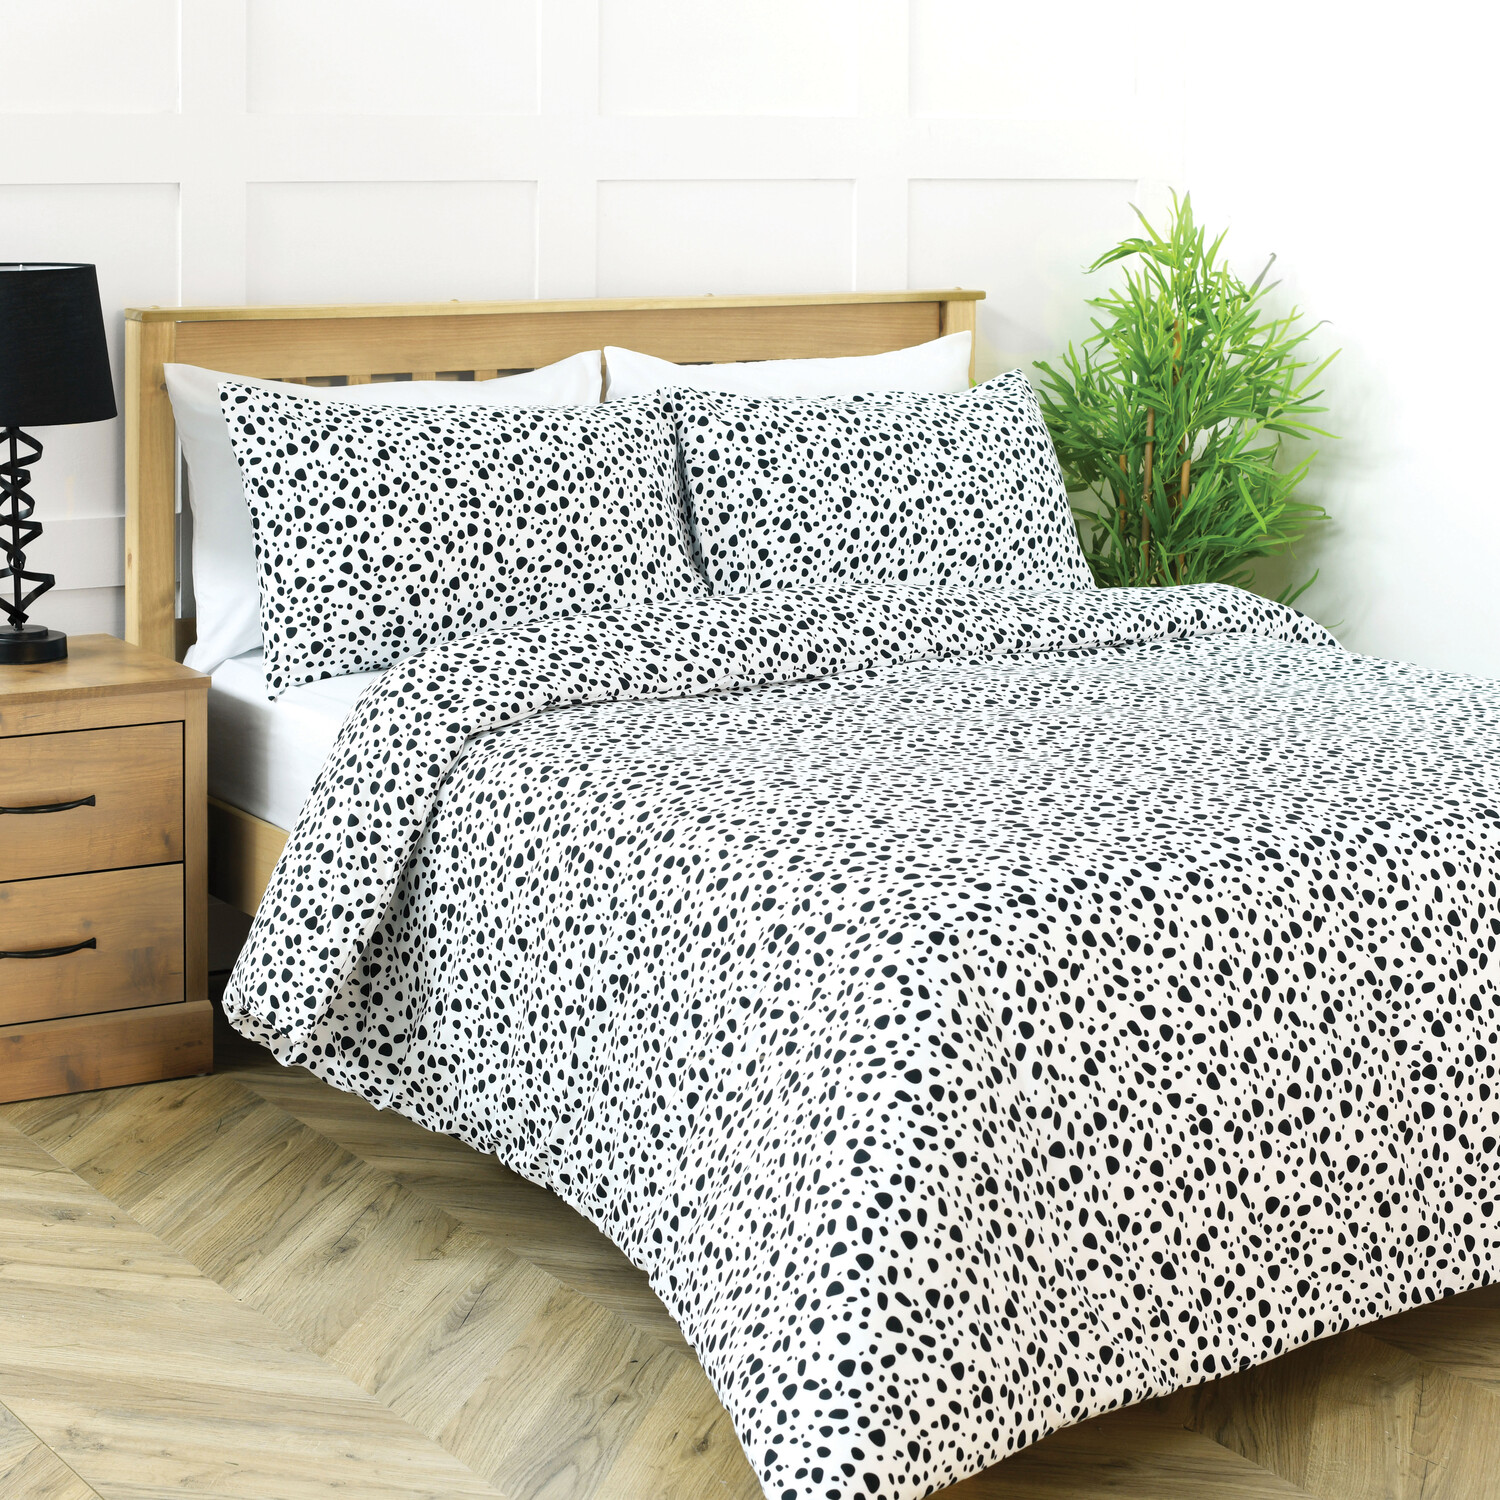 My Home Dottie King Size Monochrome Duvet Cover and Pillowcase Set Image 2